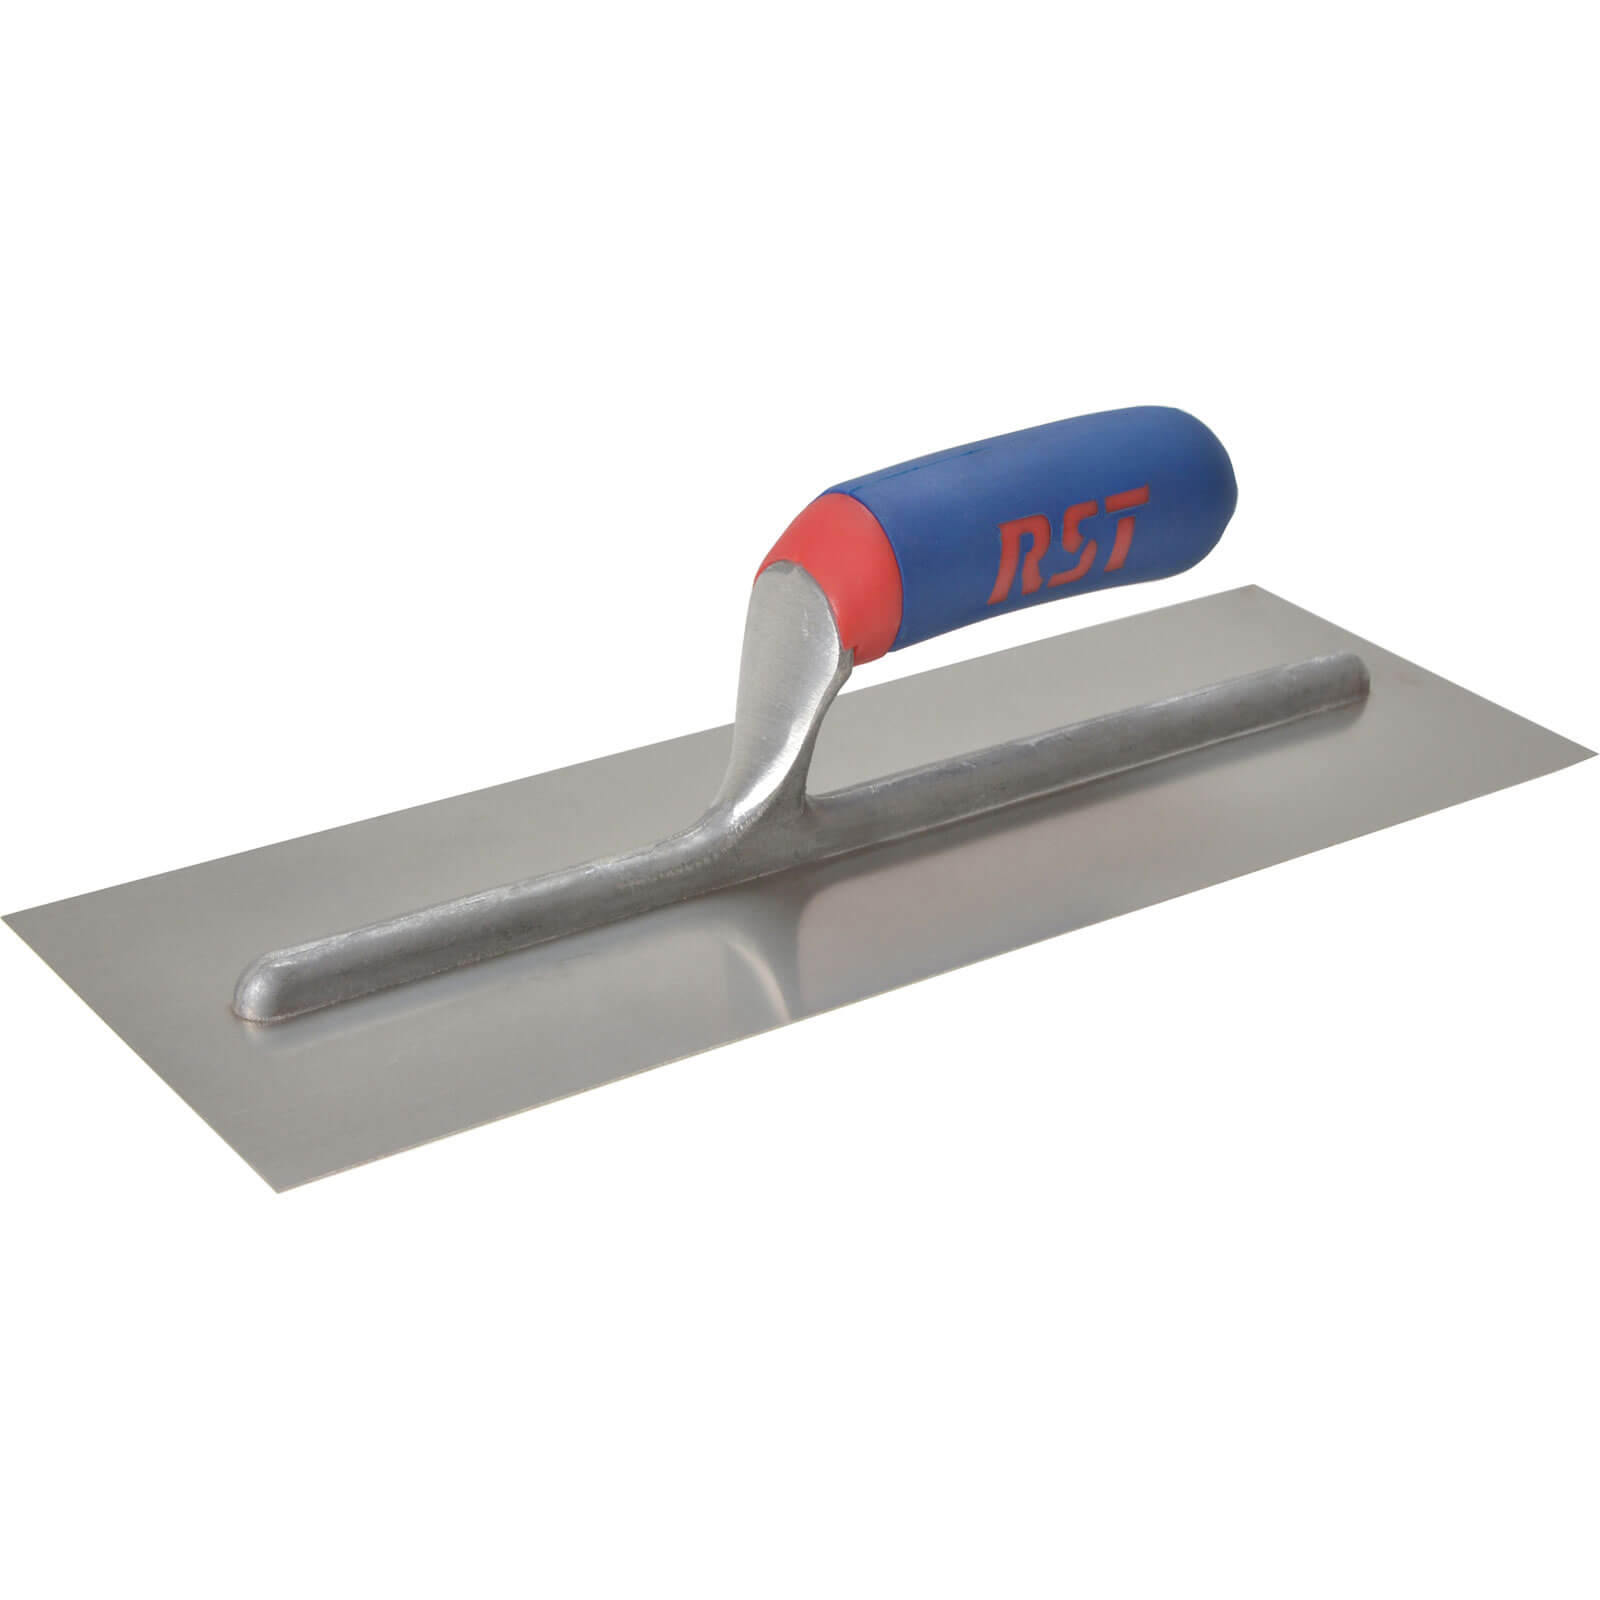 RST Softgrip Stainless Steel Finishing Trowel 14" x 4 3/4"